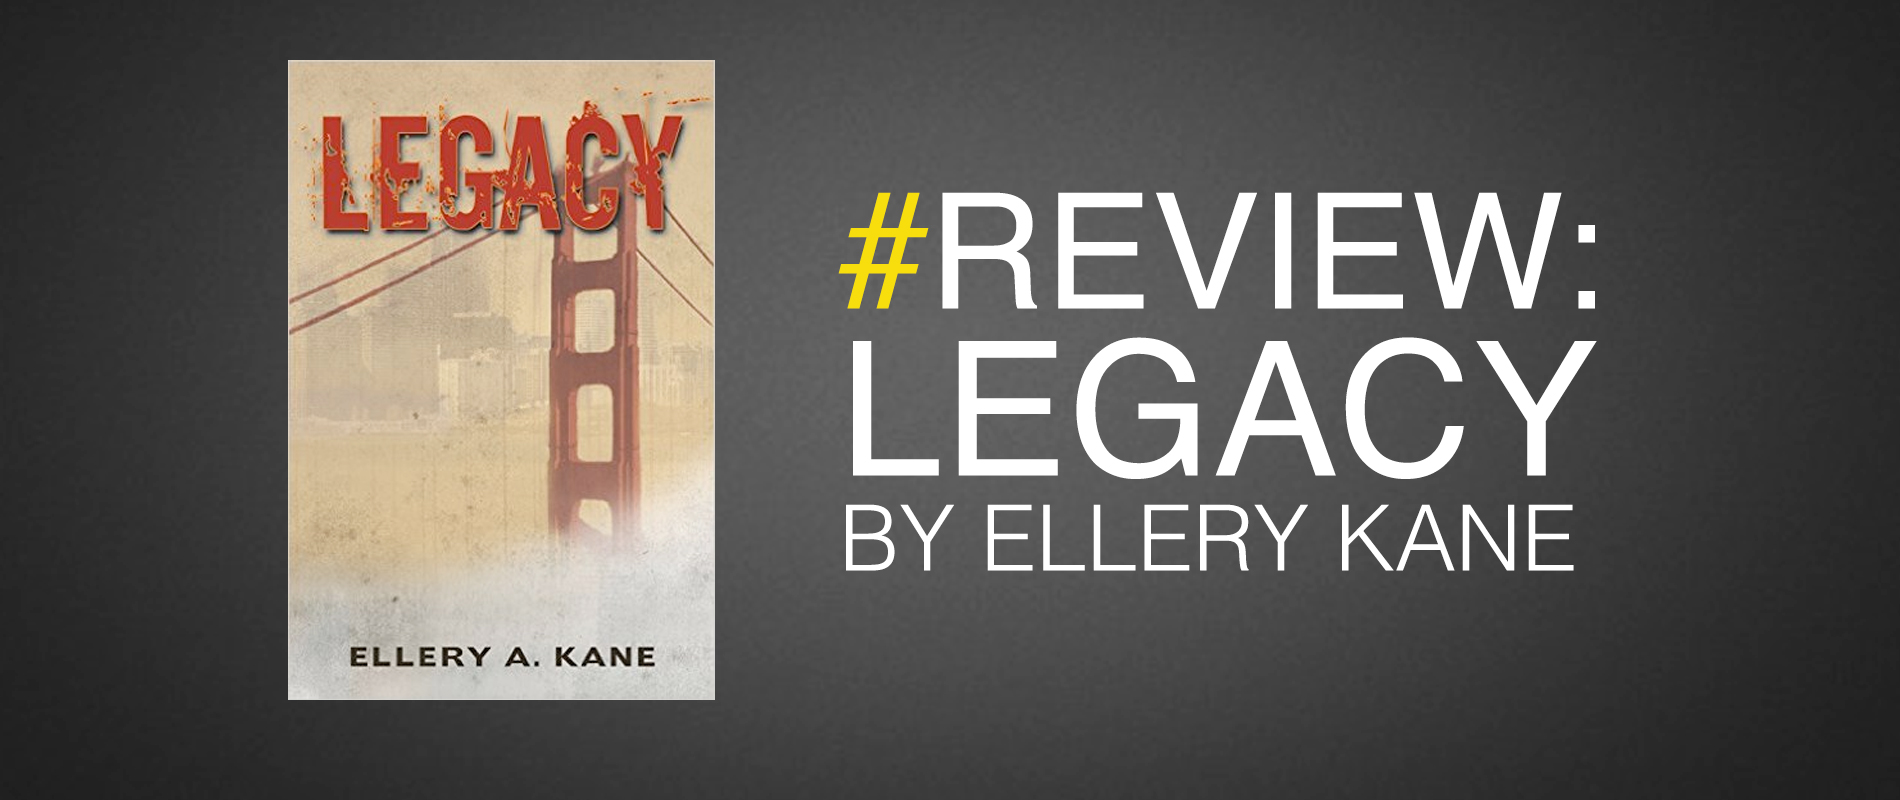 legacy by ellery kane book review